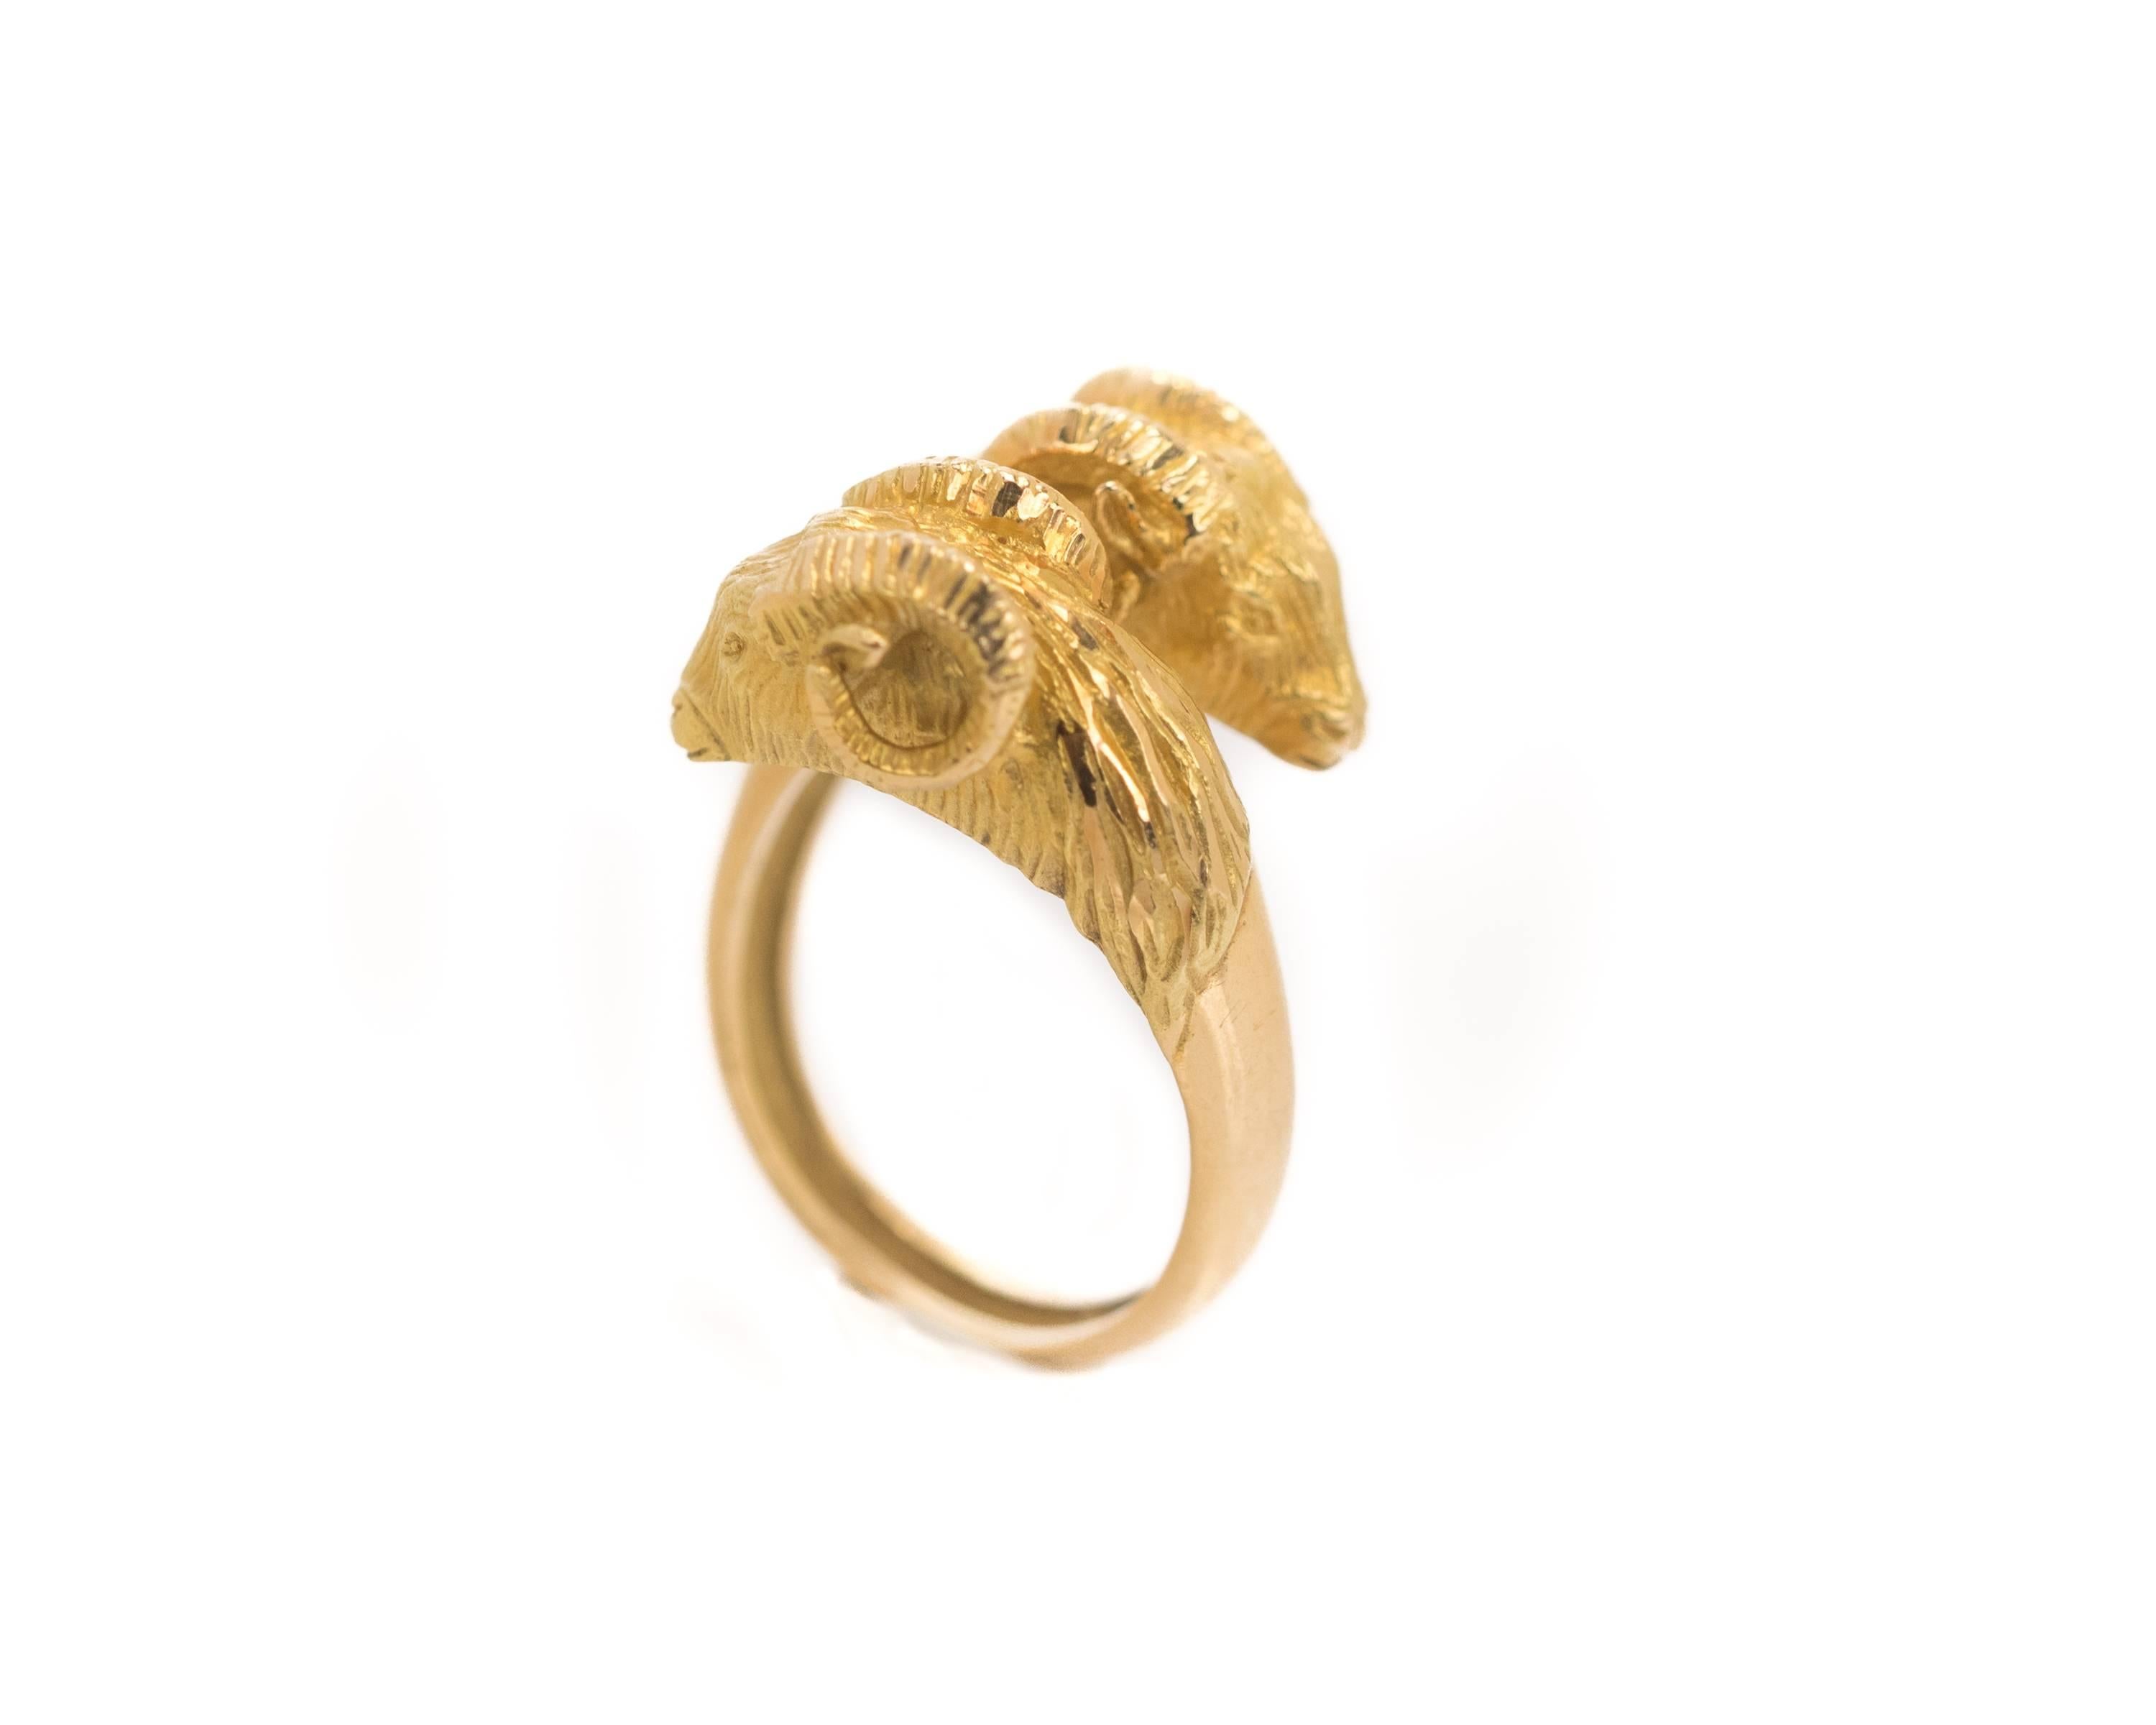 1950s Retro Rams Head Ring - 18 Karat Yellow Gold

The Ram has numerous associations across time and cultures. It is the symbol of the astrological sign Aries. The ram has significance within the Jewish and Hindu cultures. It is also associated with